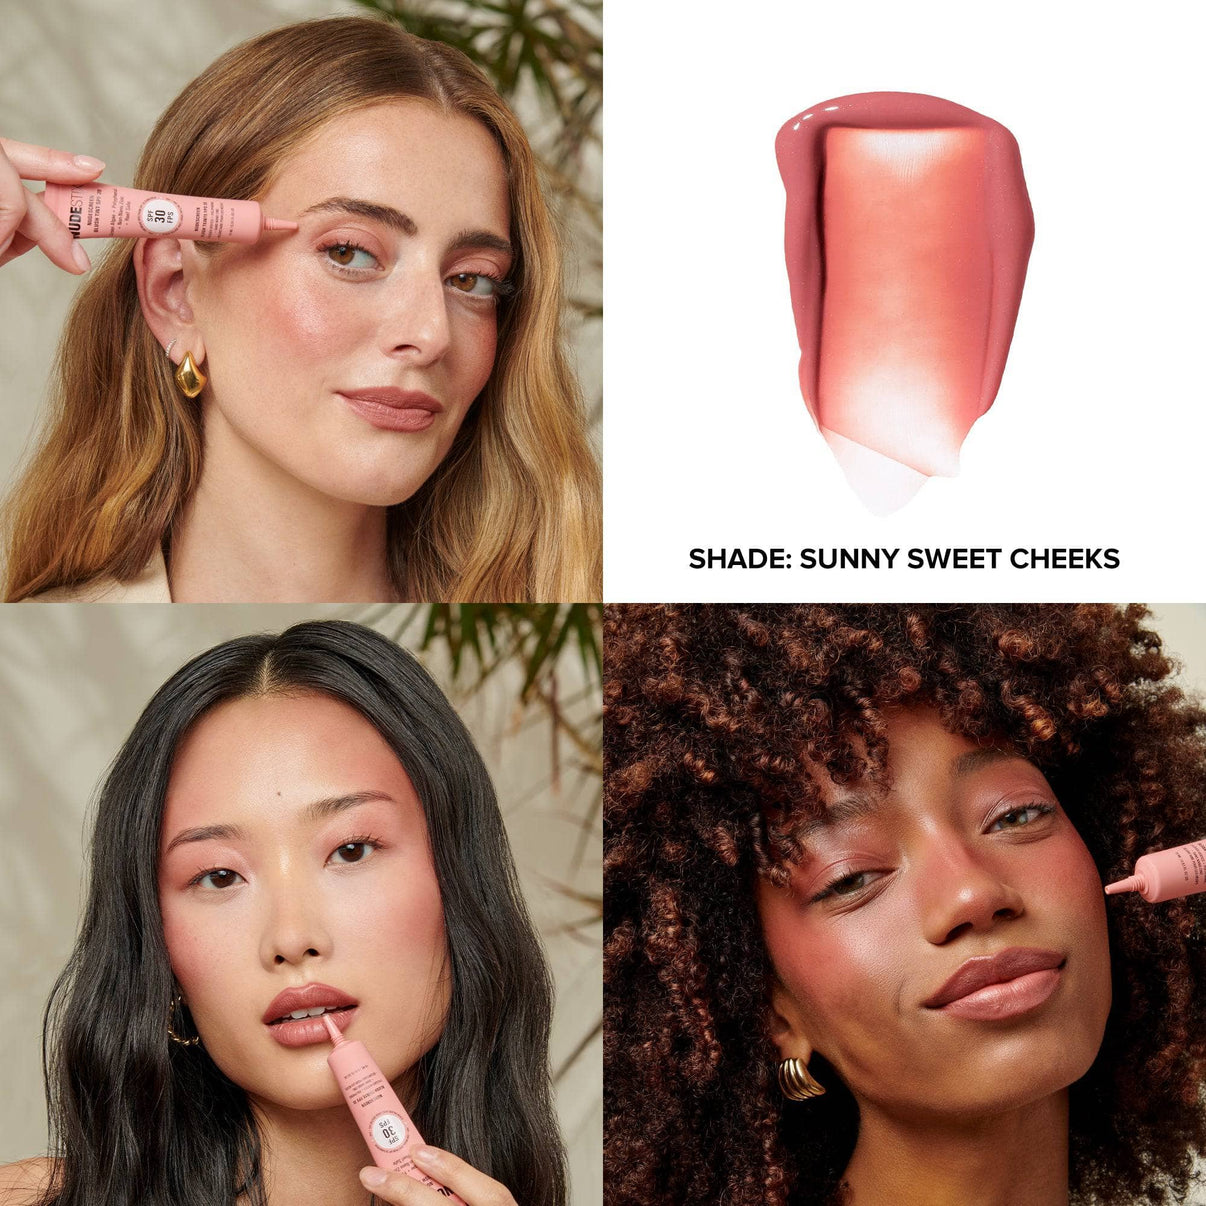 Grid with models wearing Nudescreen blush tint in shade Sunny Sweet Cheeks